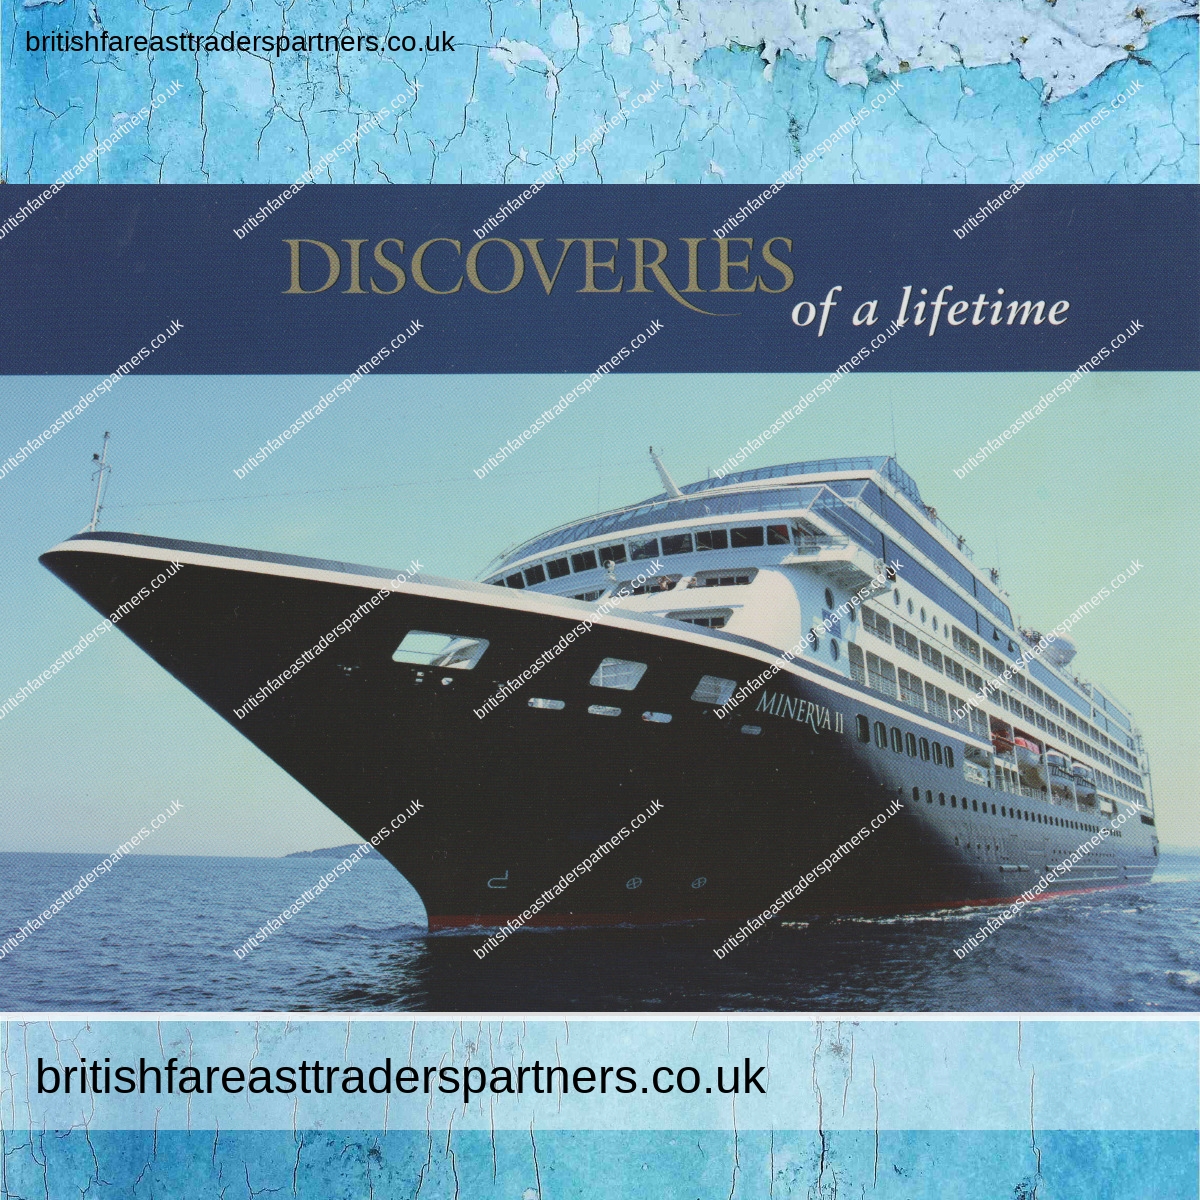 “DISCOVERIES OF A LIFETIME” POSTCARD SWAN HELLENIC DISCOVERY CRUISING FEATURING MIVERVA II COLLECTABLES | TRANSPORTATION COLLECTABLES | NAUTICAL | OCEAN LINERS |  LEISURE | LIFESTYLE | CULTURE | TRAVEL | HERITAGE | HISTORY